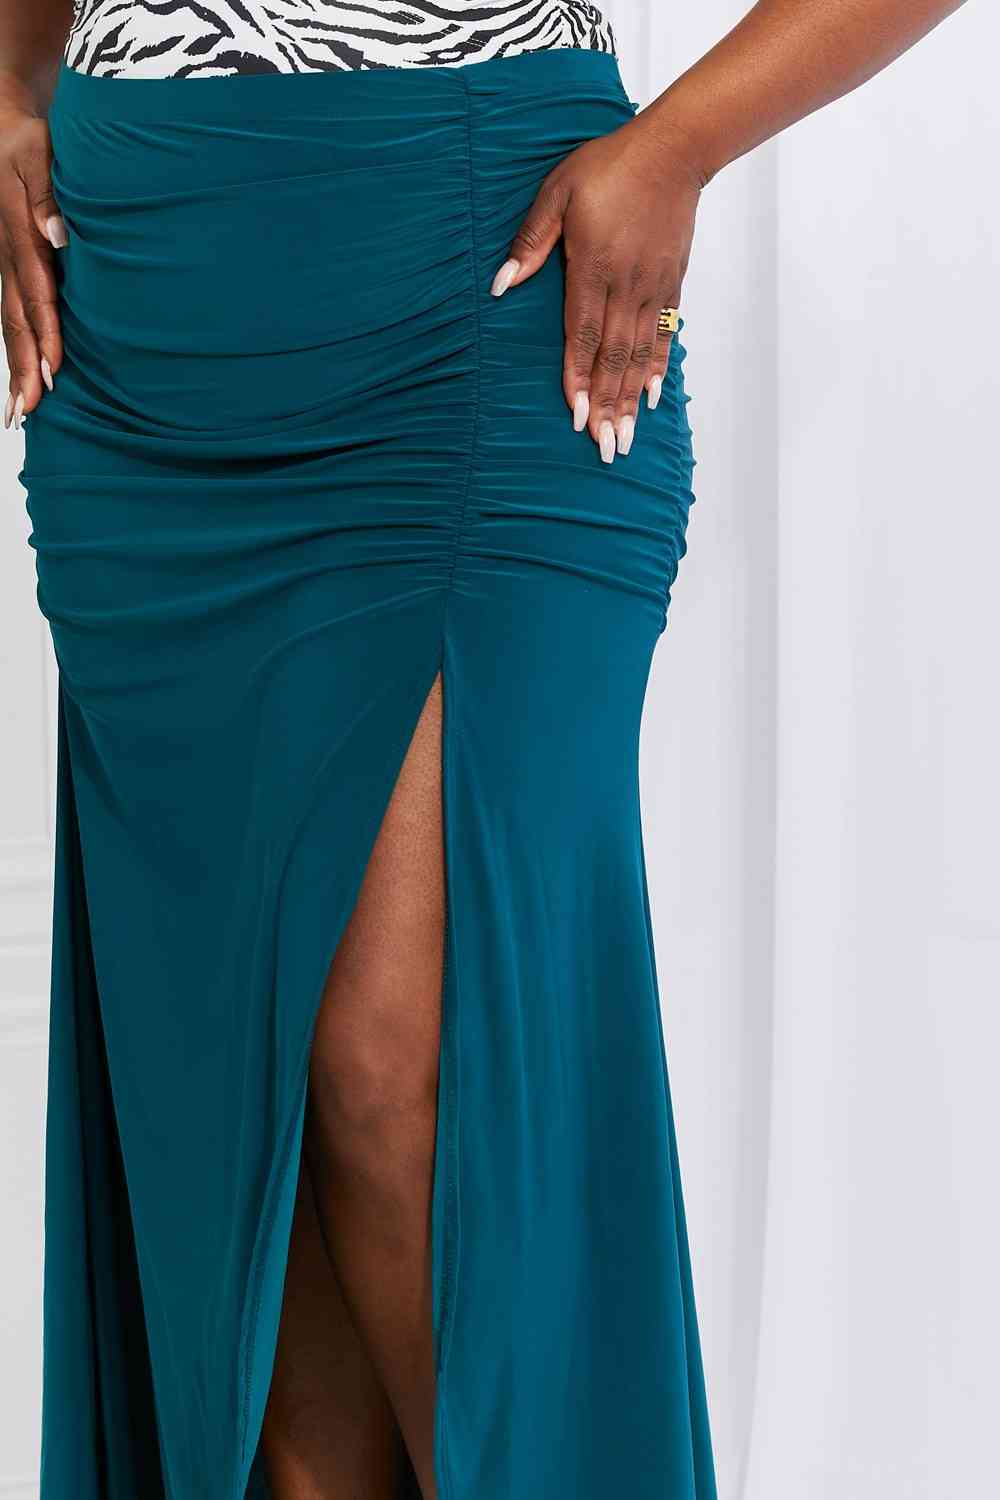 White Birch Full Size Up and Up Ruched Slit Maxi Skirt in Teal - Luna Haru